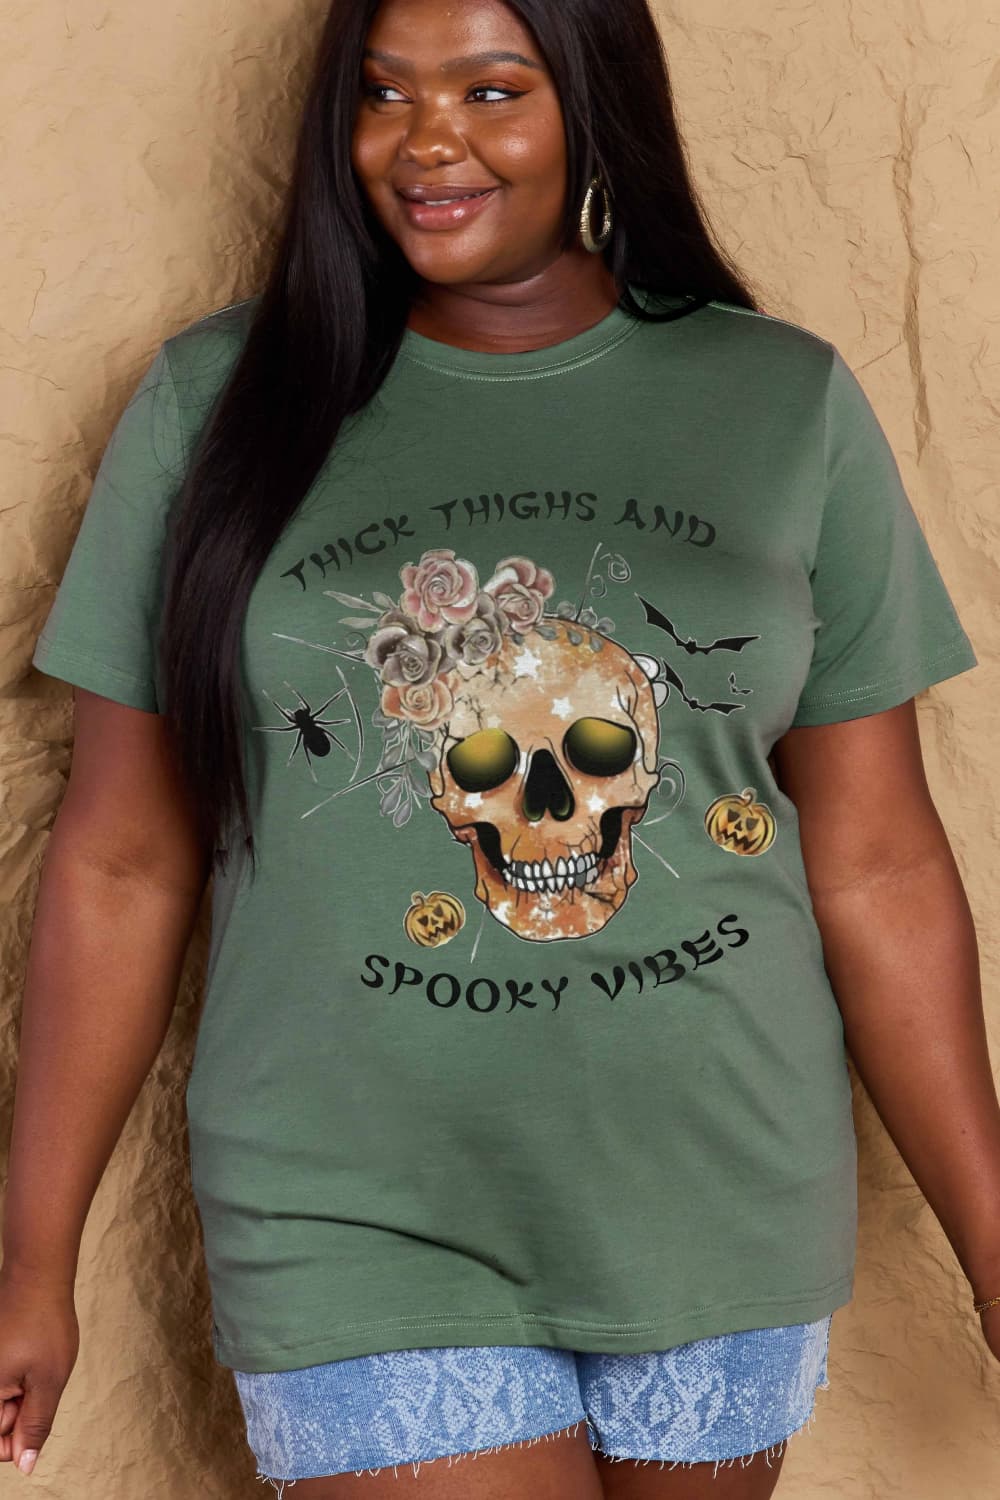 Simply Love Full Size Halloween THICK THIGHS AND SPOOKY VIBES Graphic Cotton T-Shirt